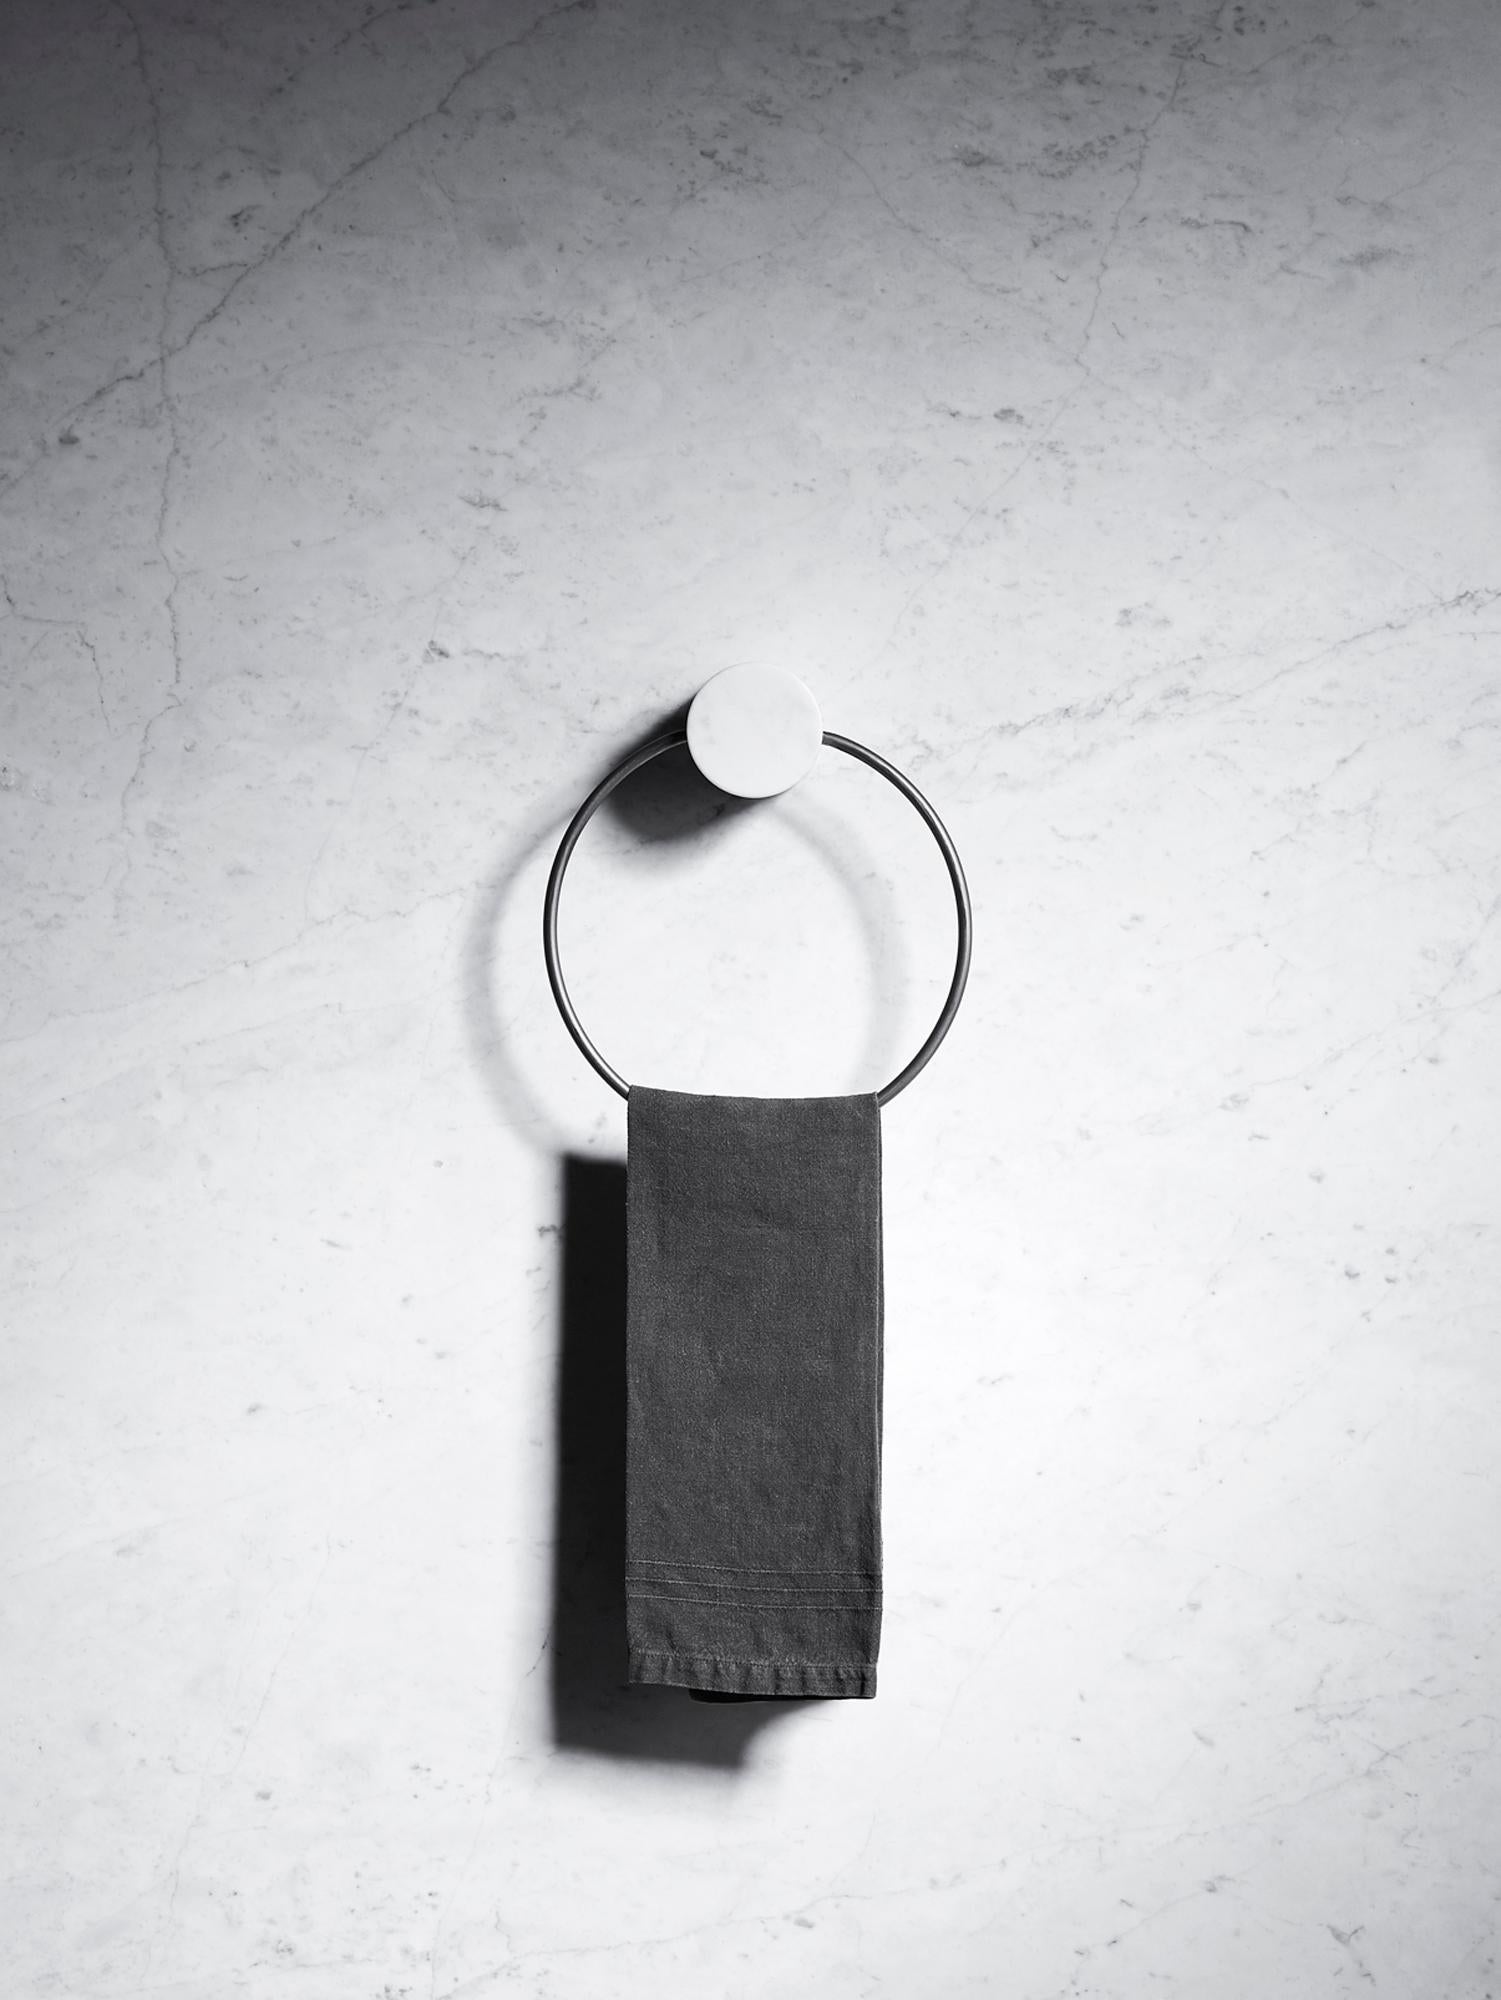 Contemporary Salvatori Fontane Bianche Towel Ring by Elisa Ossino For Sale